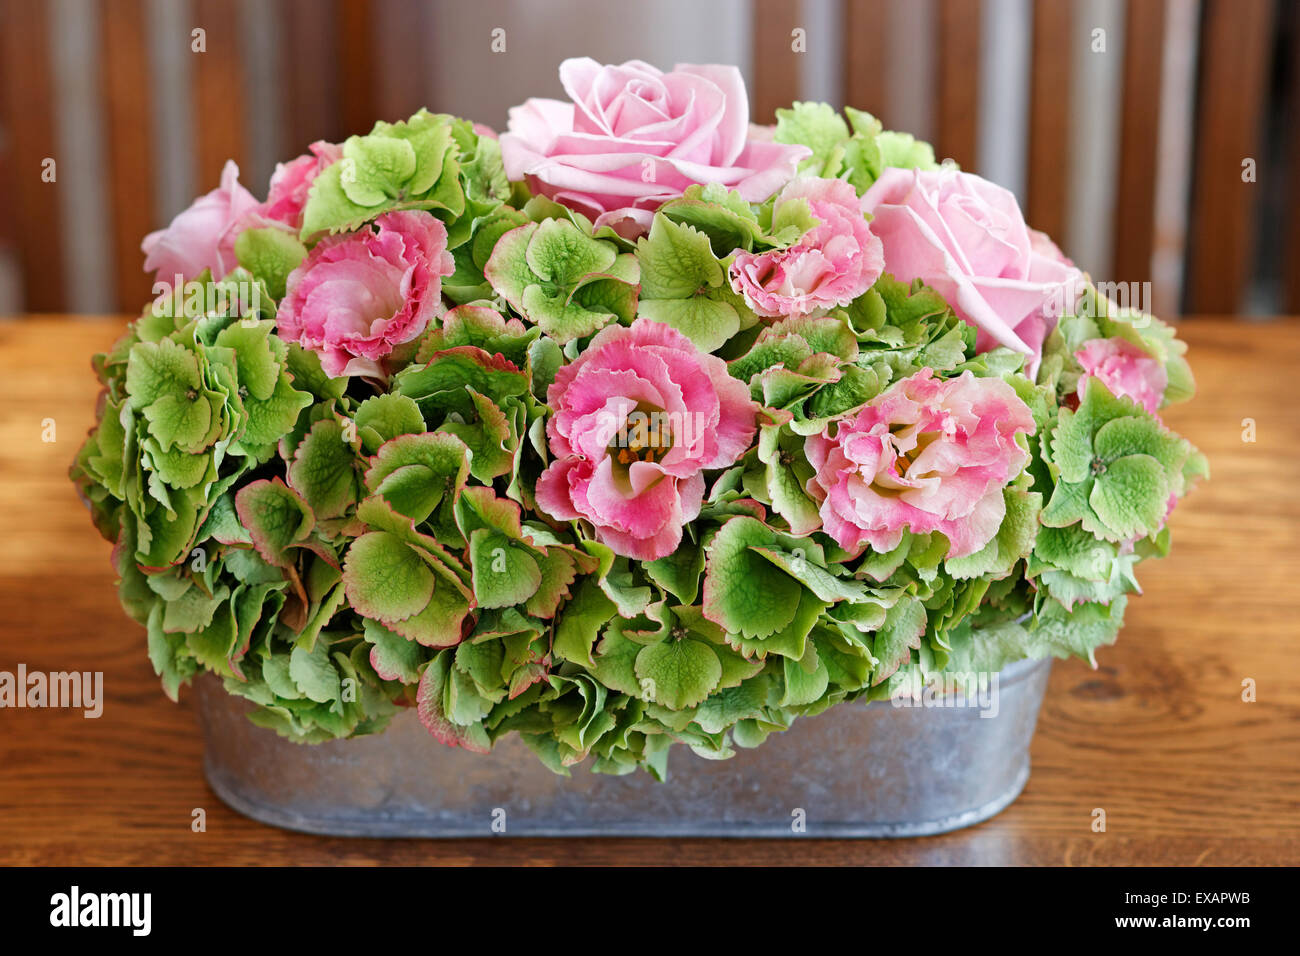 Floral table arrangement of Keano Rose, Lisianthus 'Arena Champagne' and green Hydrangeas Stock Photo